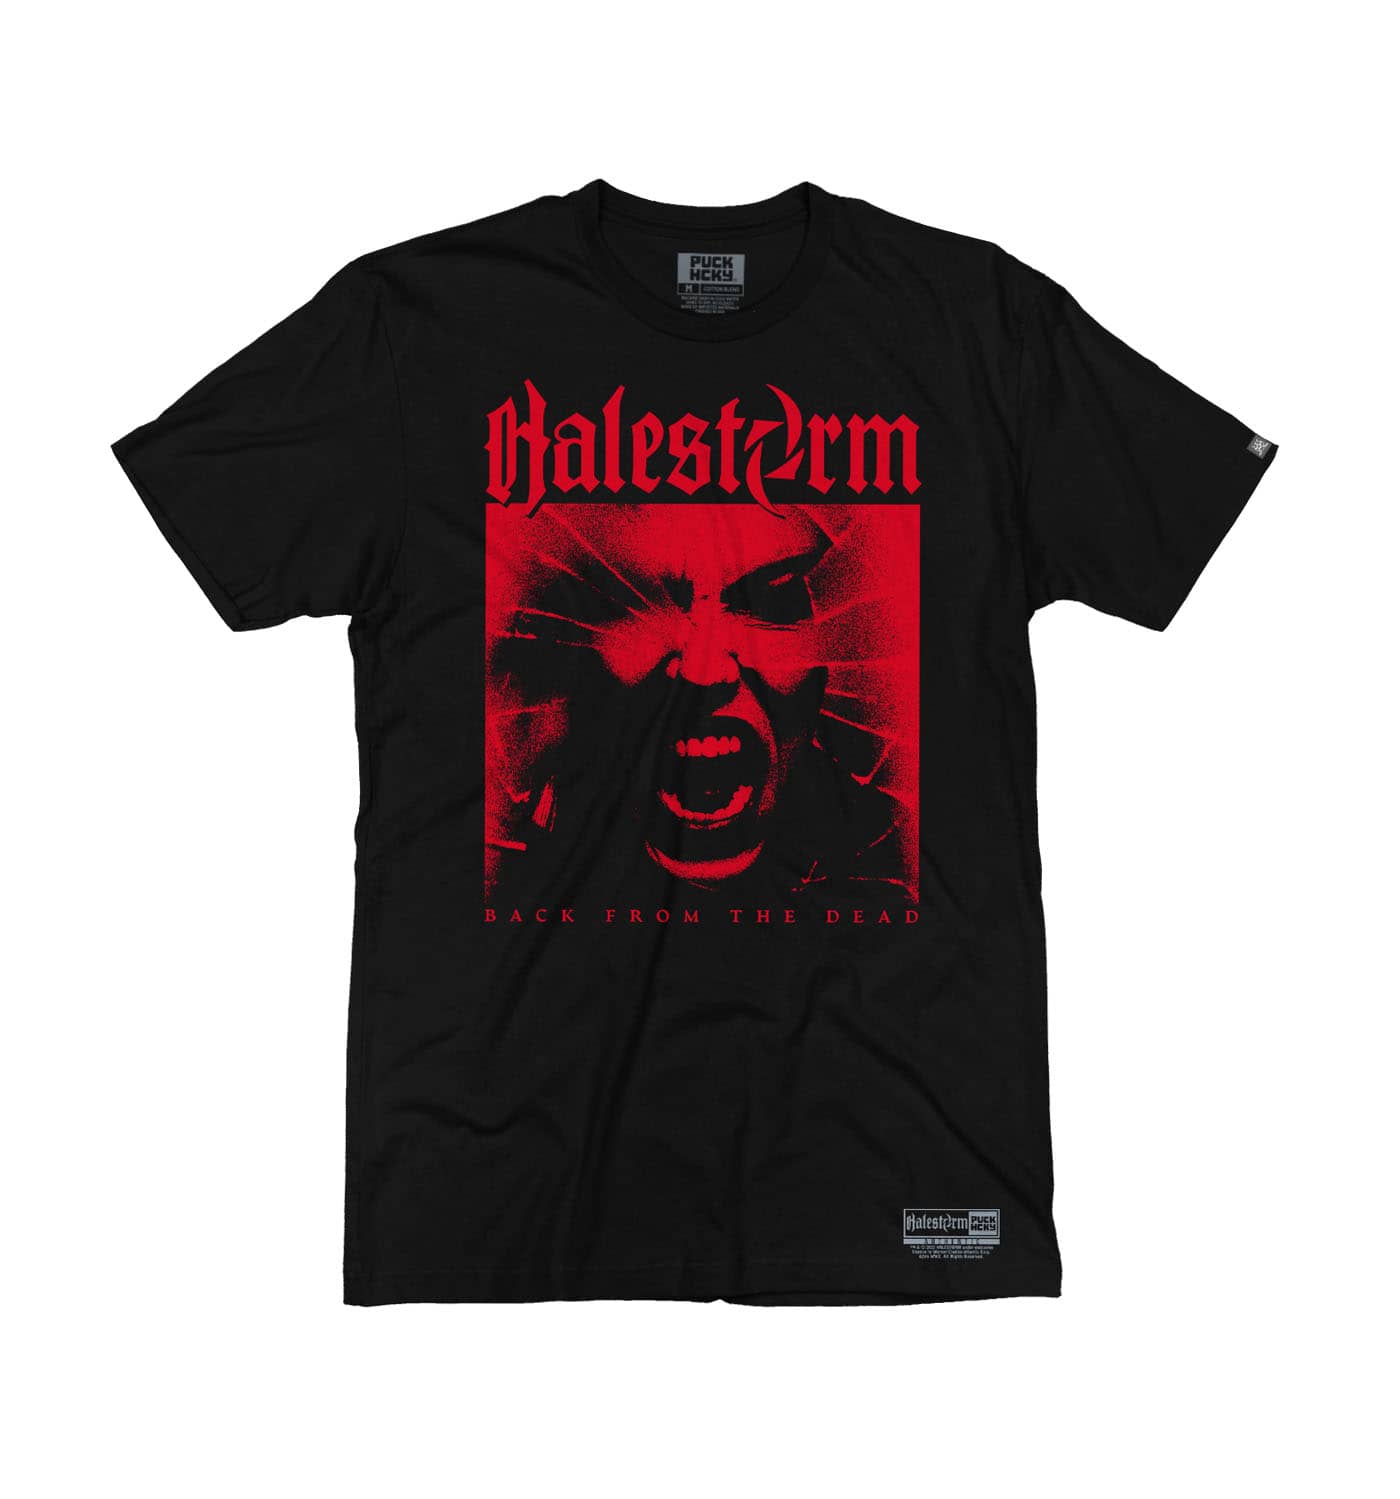 HALESTORM 'BACK FROM THE DEAD' short sleeve hockey t-shirt in black front view